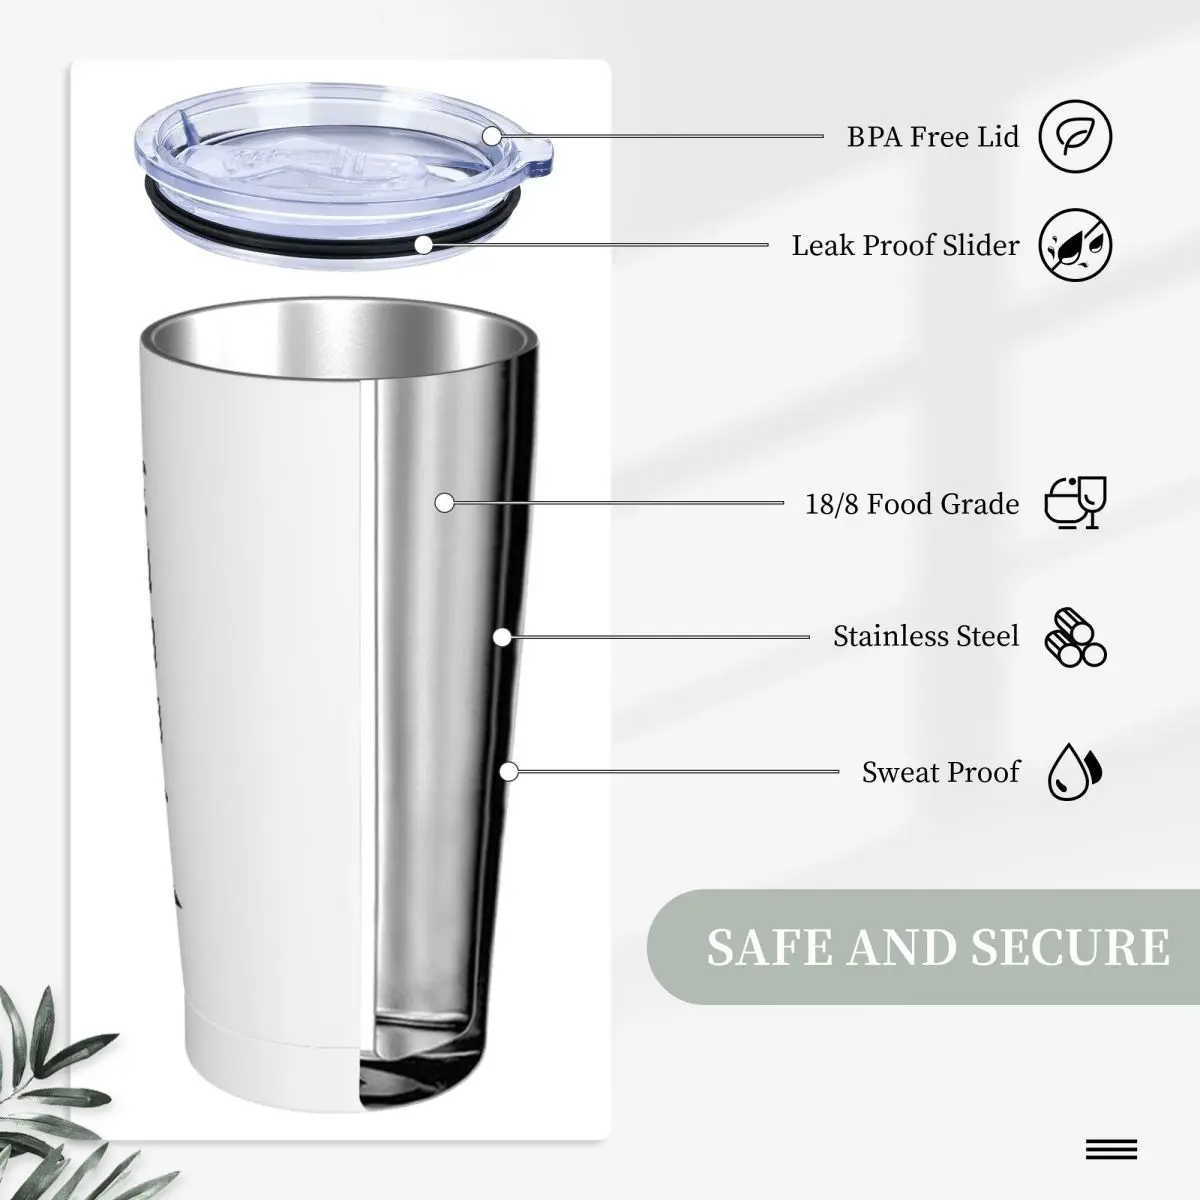 https://ae01.alicdn.com/kf/S7c8b1af0438c4ac09527910cc7729743D/Car-Tesla-Logo-Racing-Tumbler-Vacuum-Insulated-Coffee-Cups-Stainless-Steel-Double-Wall-Mug-Spill-Proof.jpg